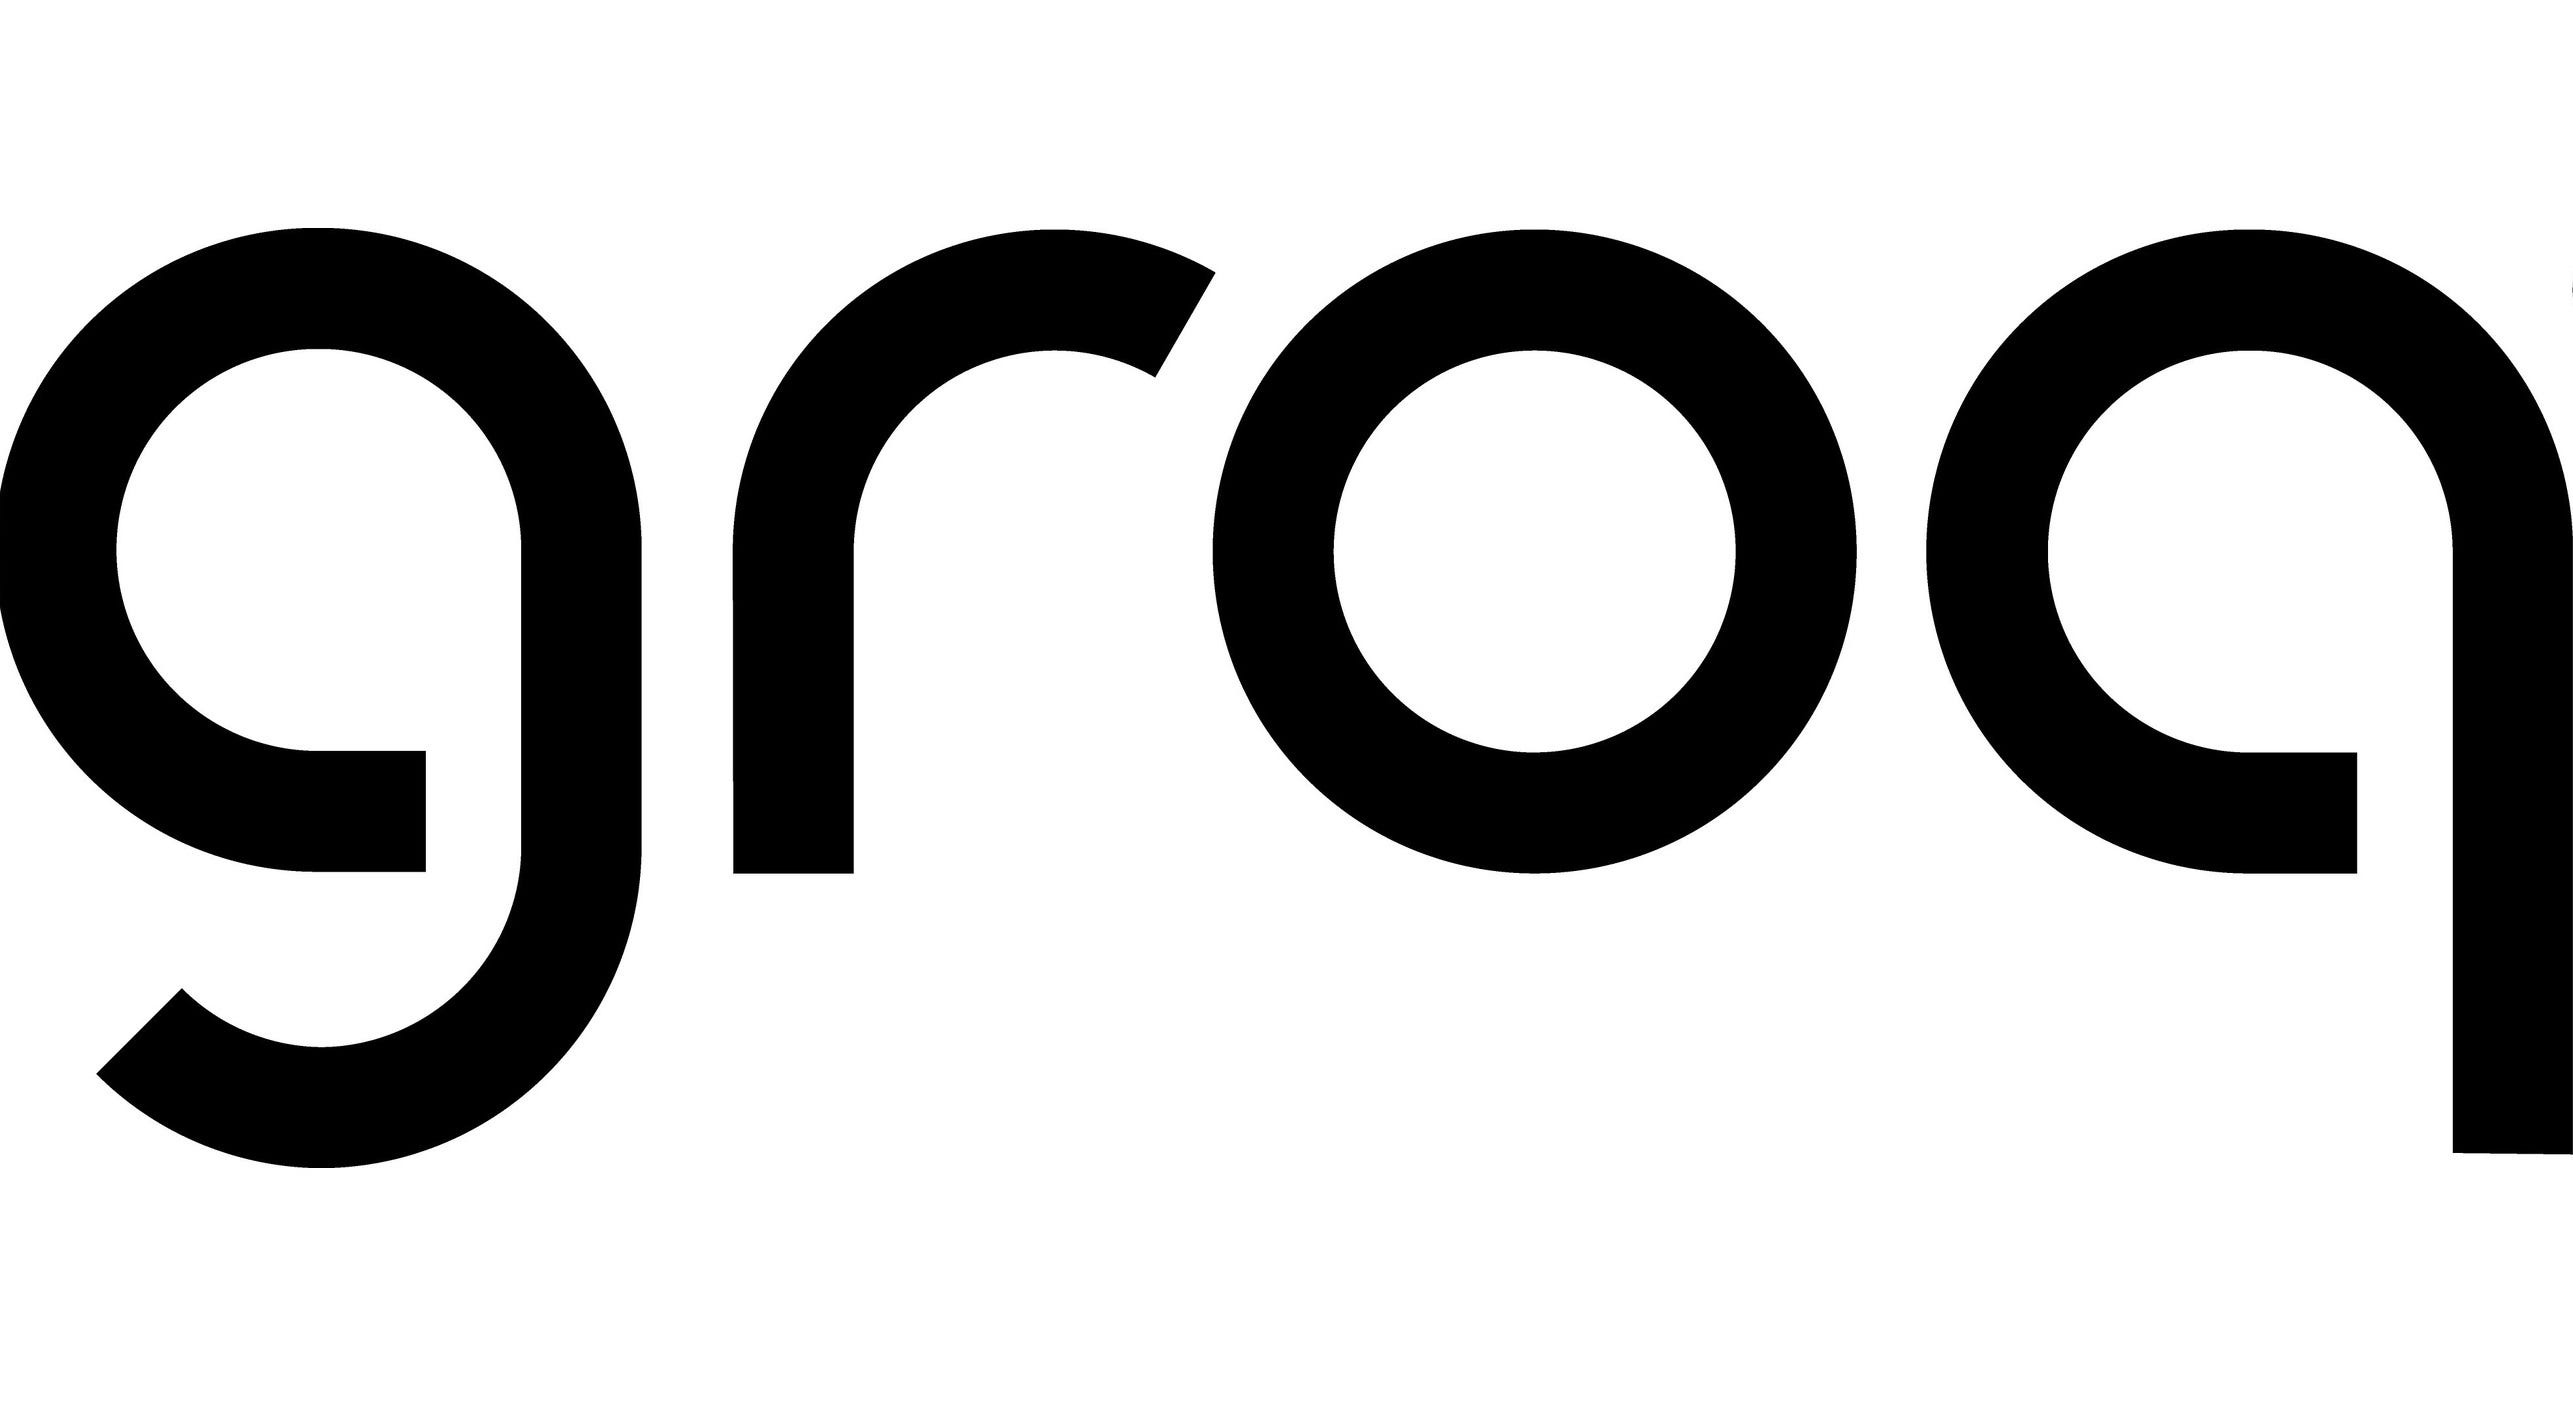 Groq API: Unleashing the Power of Ultra-Low Latency AI Inference